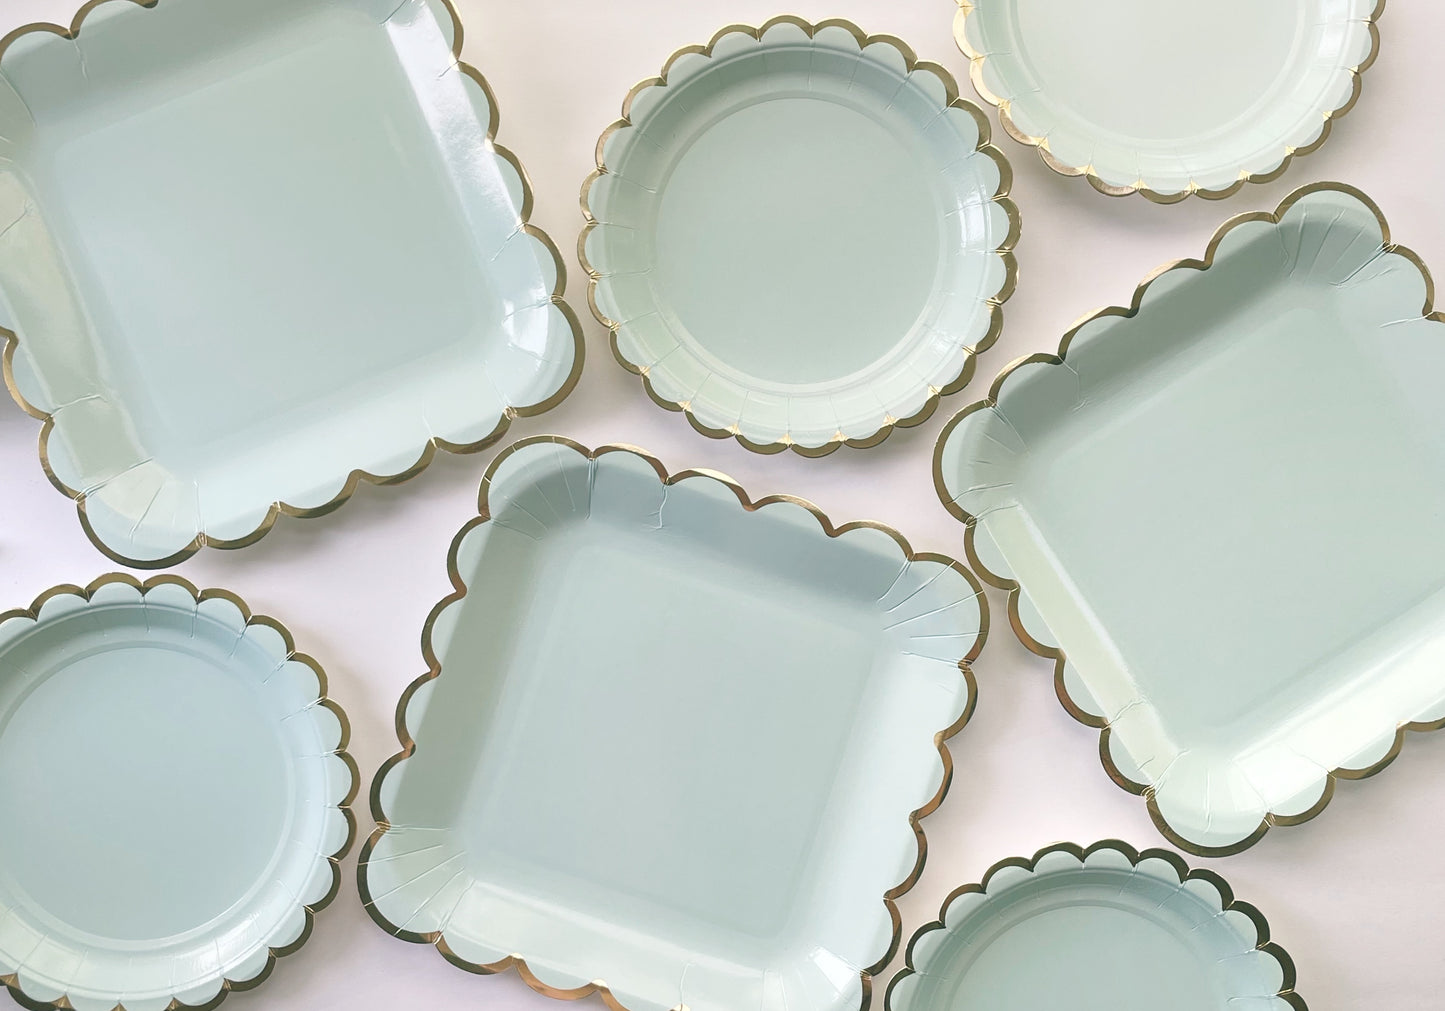 Large and small paper party plates. The plates are a pale pastel blue colour with gold foil scalloped trim.